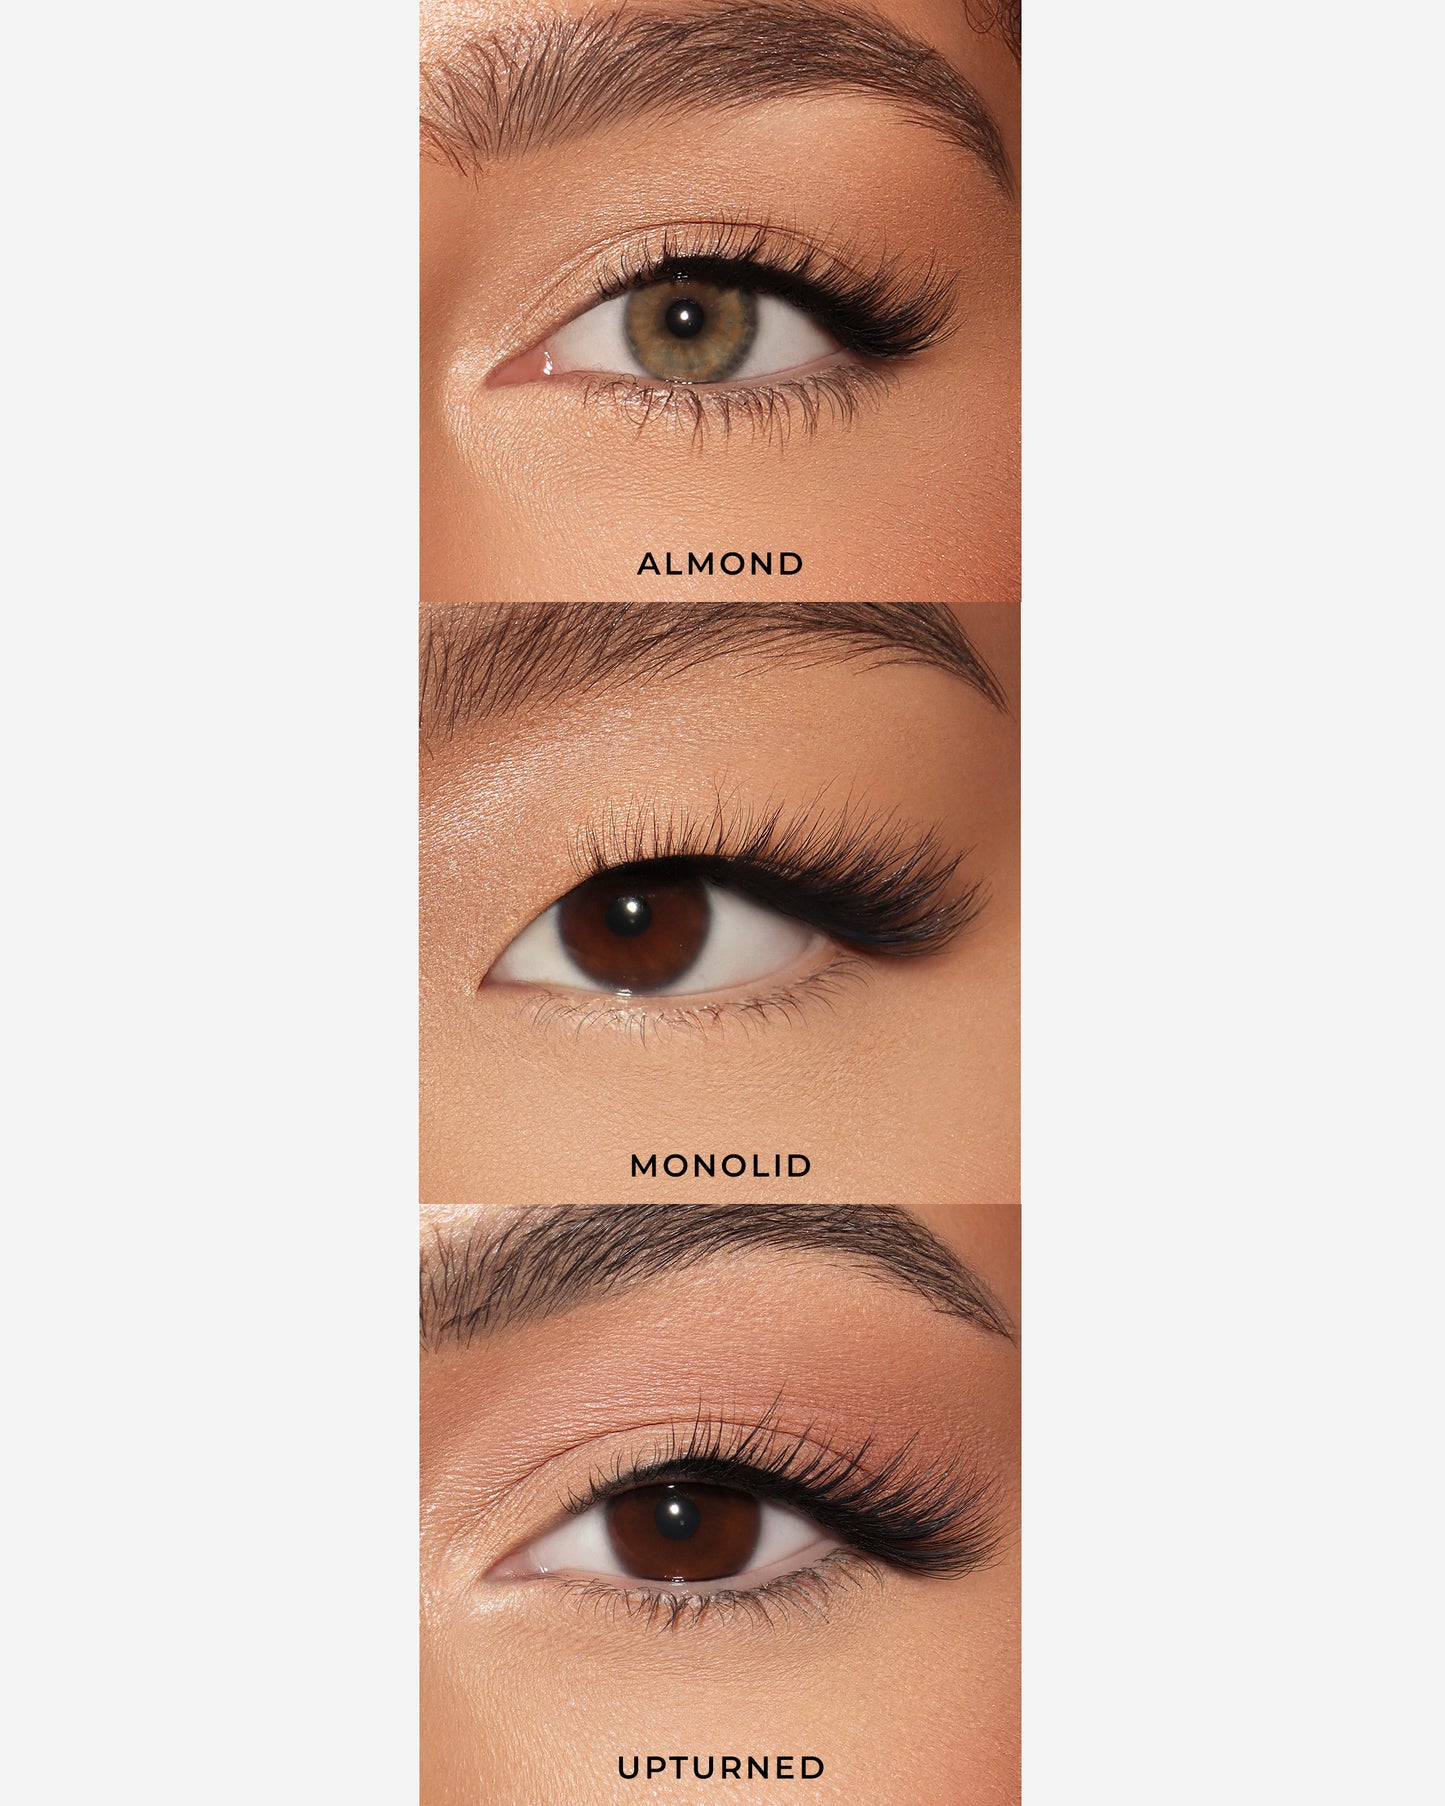 Lilly Lashes | Sheer Band | Inviting | Eye Crop Grid - Almond, Monolid, & Upturned Eye Shapes